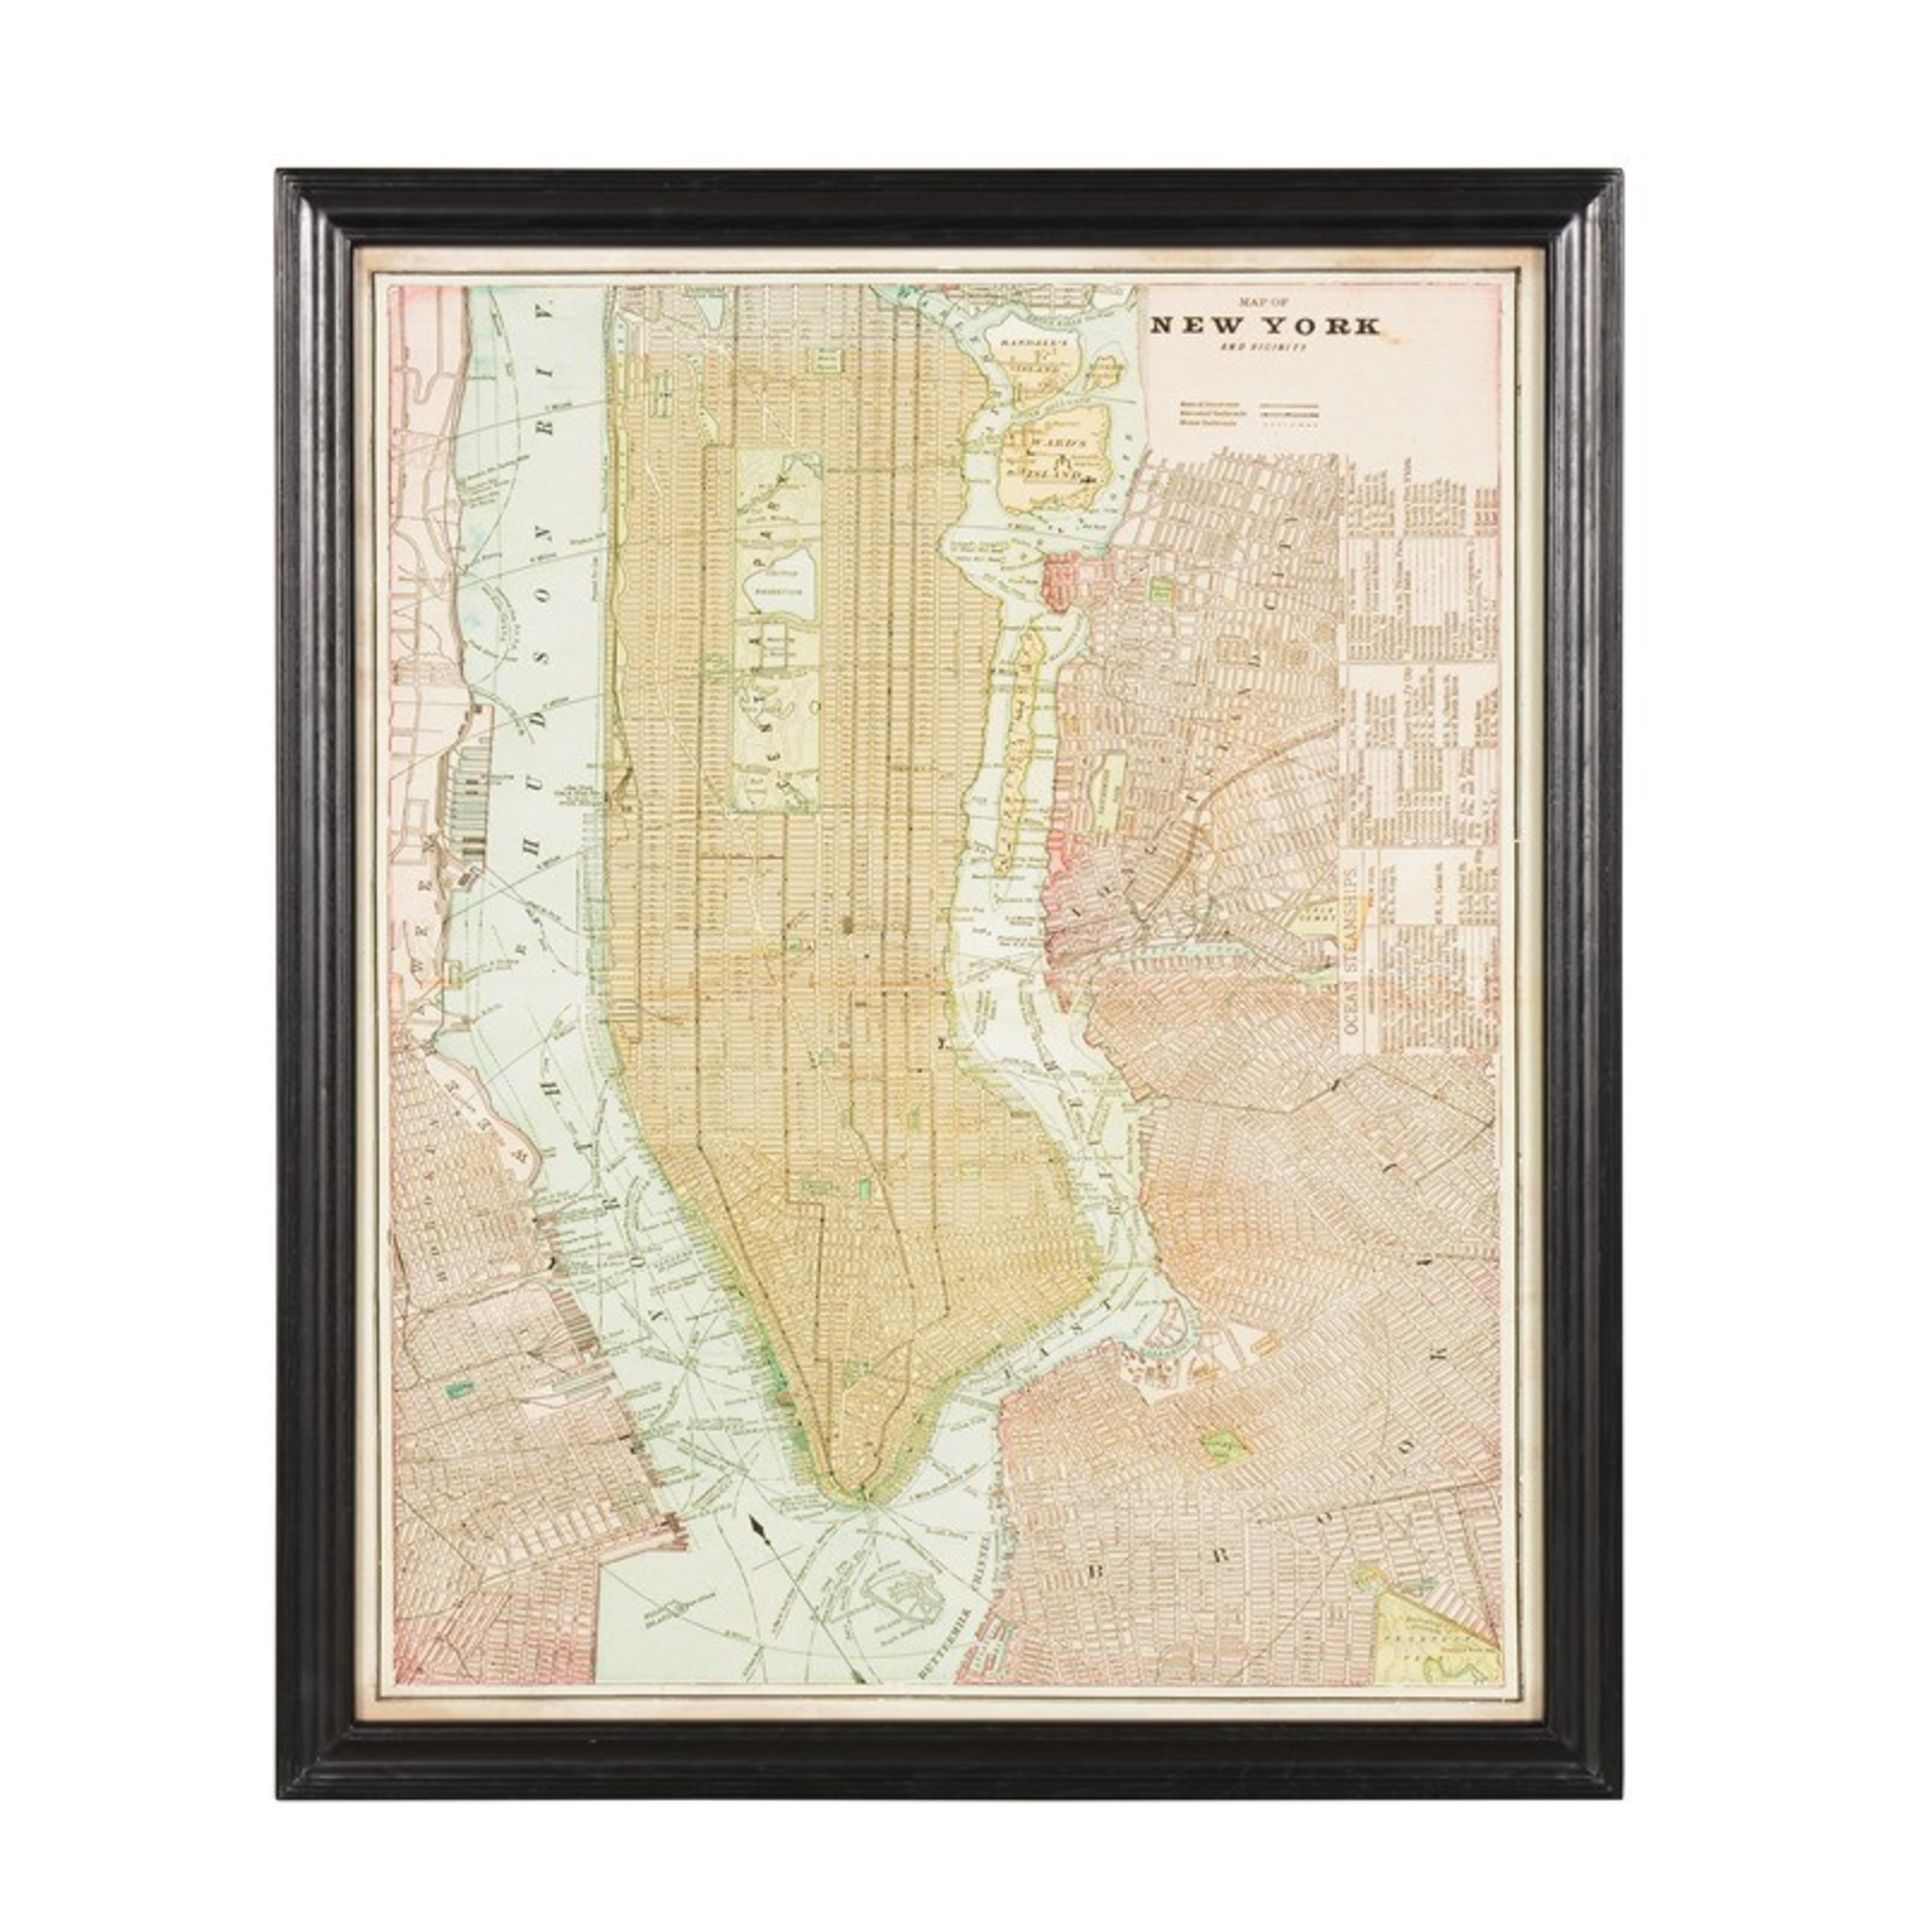 Capital Map New York These Unframed City Maps Pay Homage To Each City's History And The Life Stories - Image 2 of 2